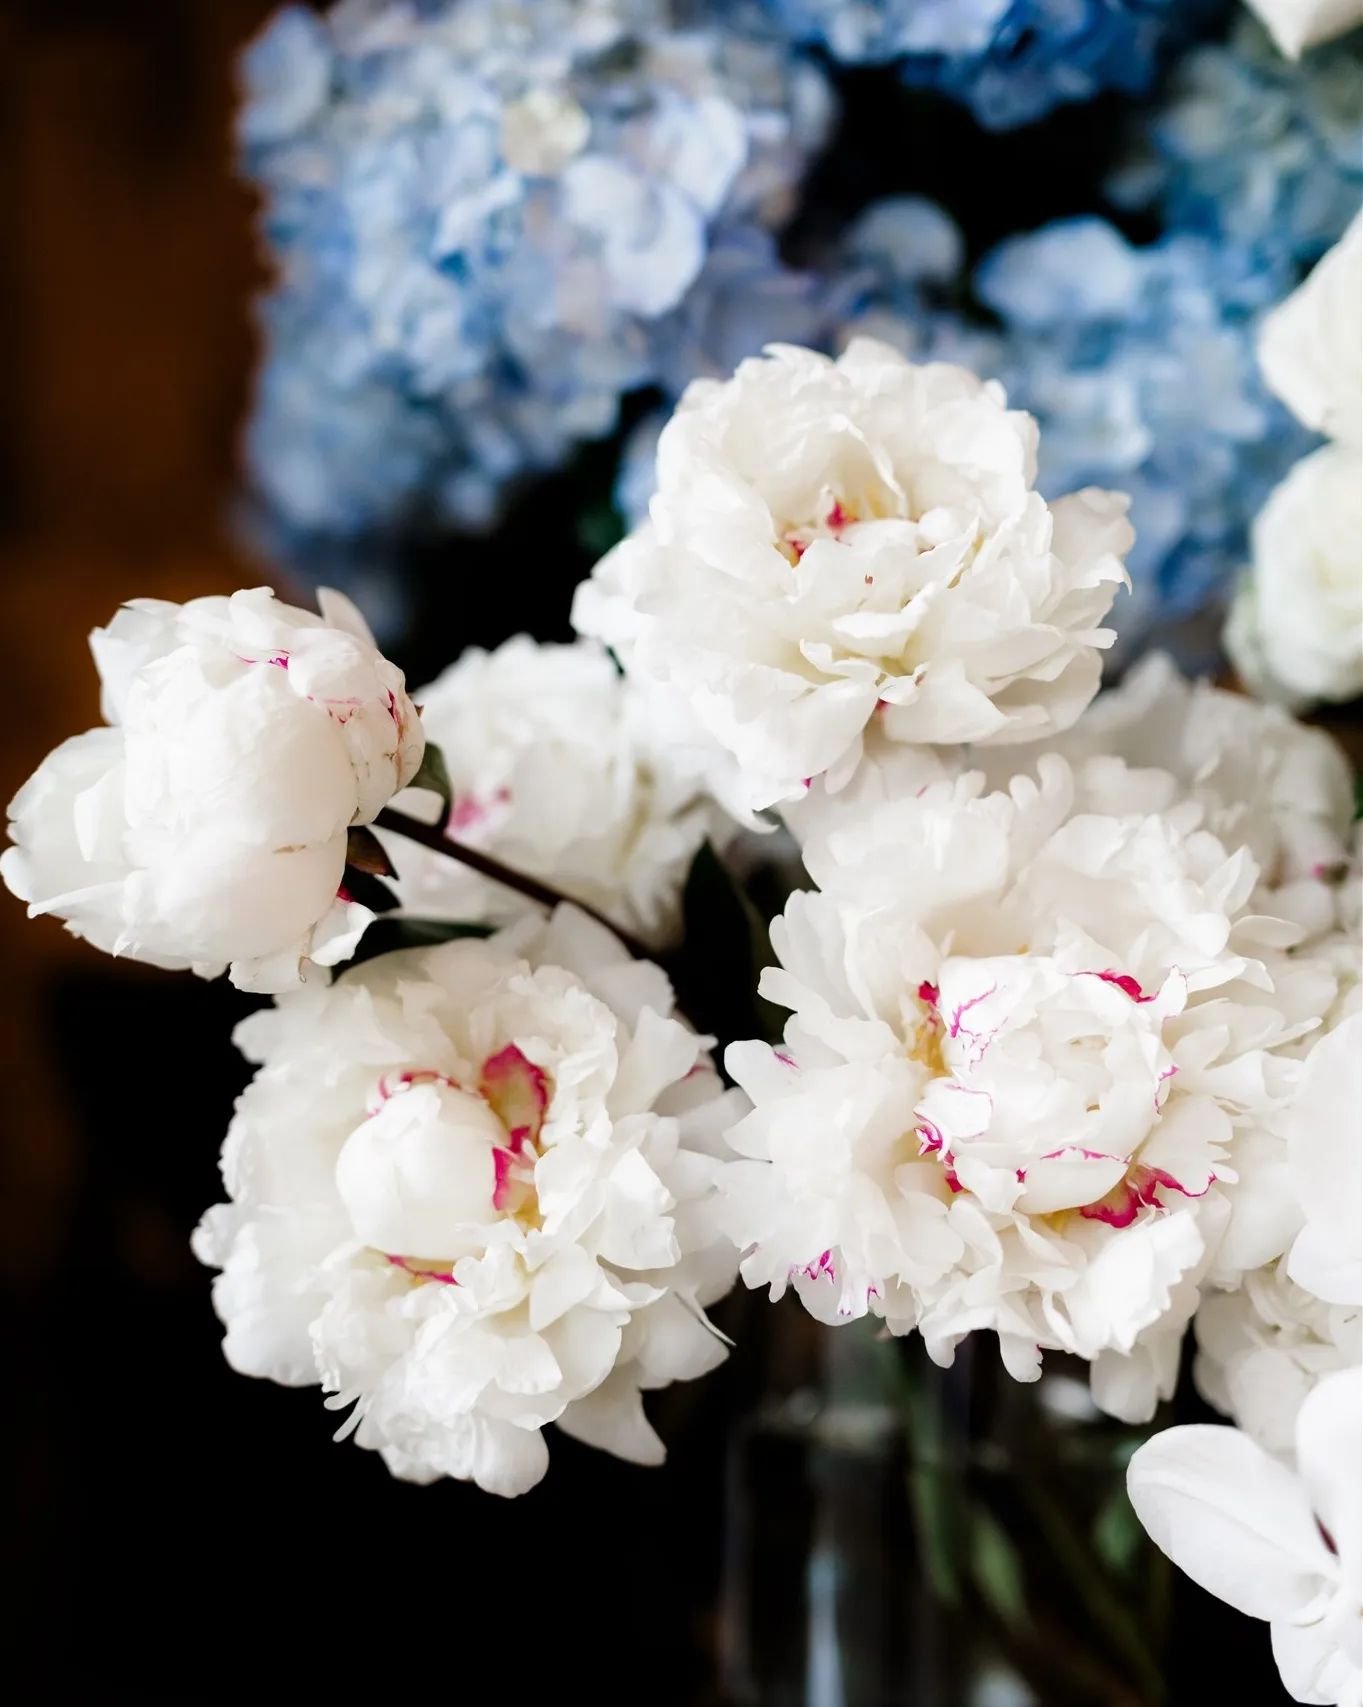 The dreamiest peonies I have ever seen! 😍
Weddings are full of details and many moments. So, why do photographers spend 30 minutes during preparation capturing those beautiful detail shots?

Because these details are the brushstrokes that paint the 